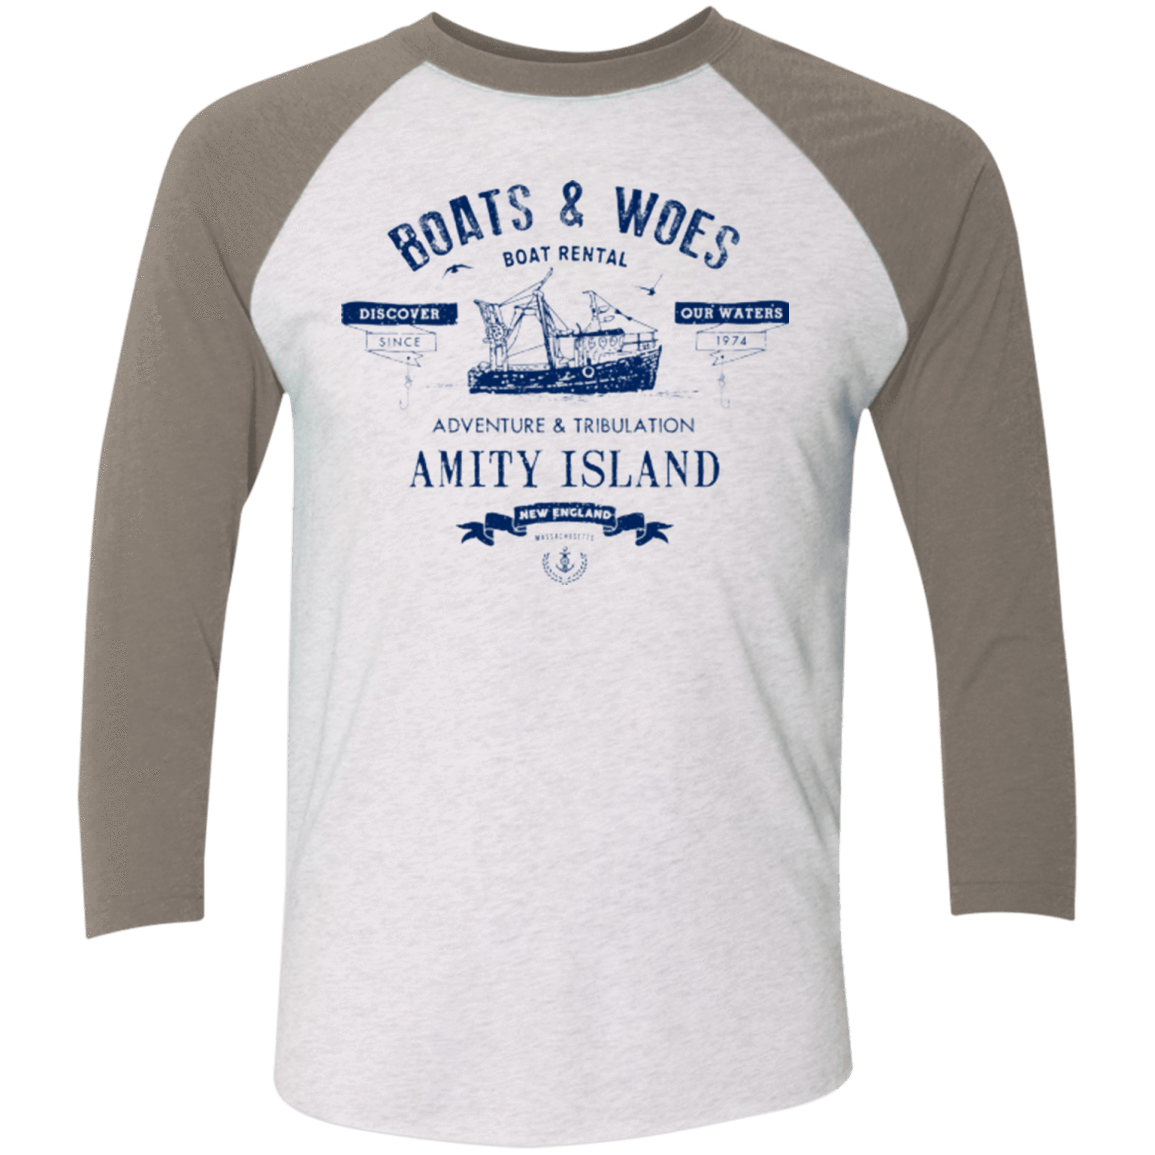 T-Shirts Heather White/Vintage Grey / X-Small BOATS & WOES Men's Triblend 3/4 Sleeve